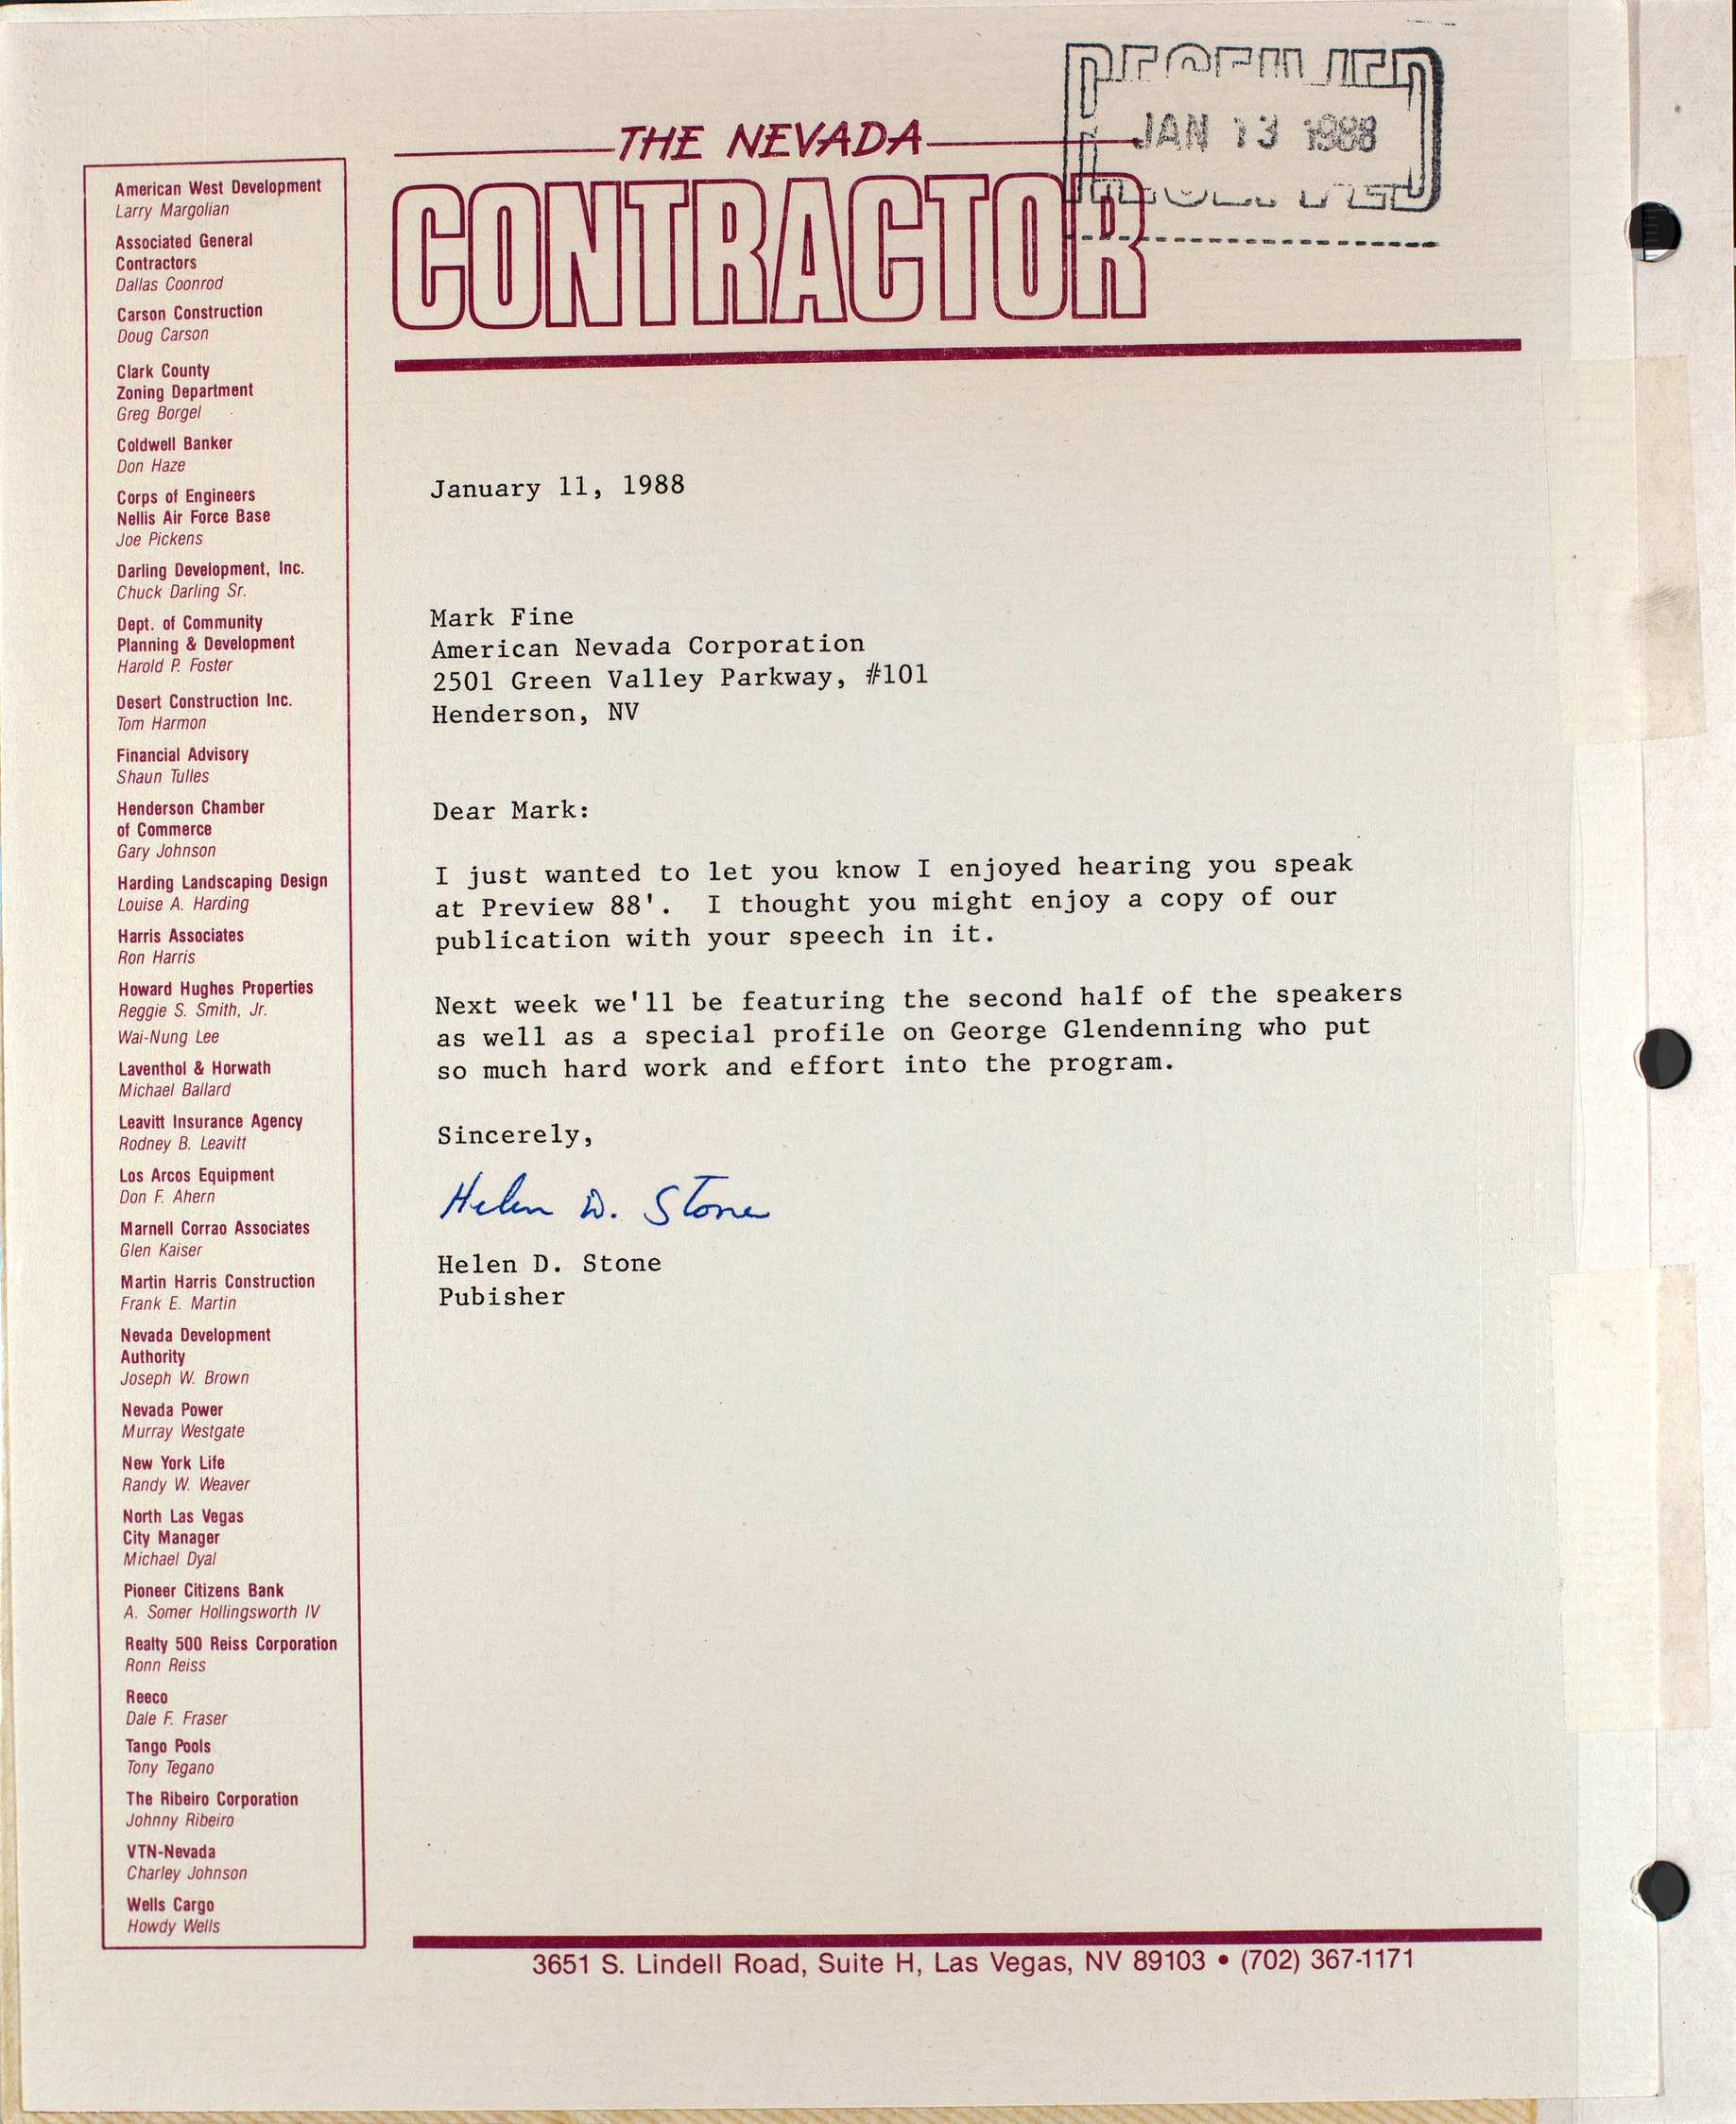 Letter from Helen D. Stone to Mark Fine, January 11, 1988